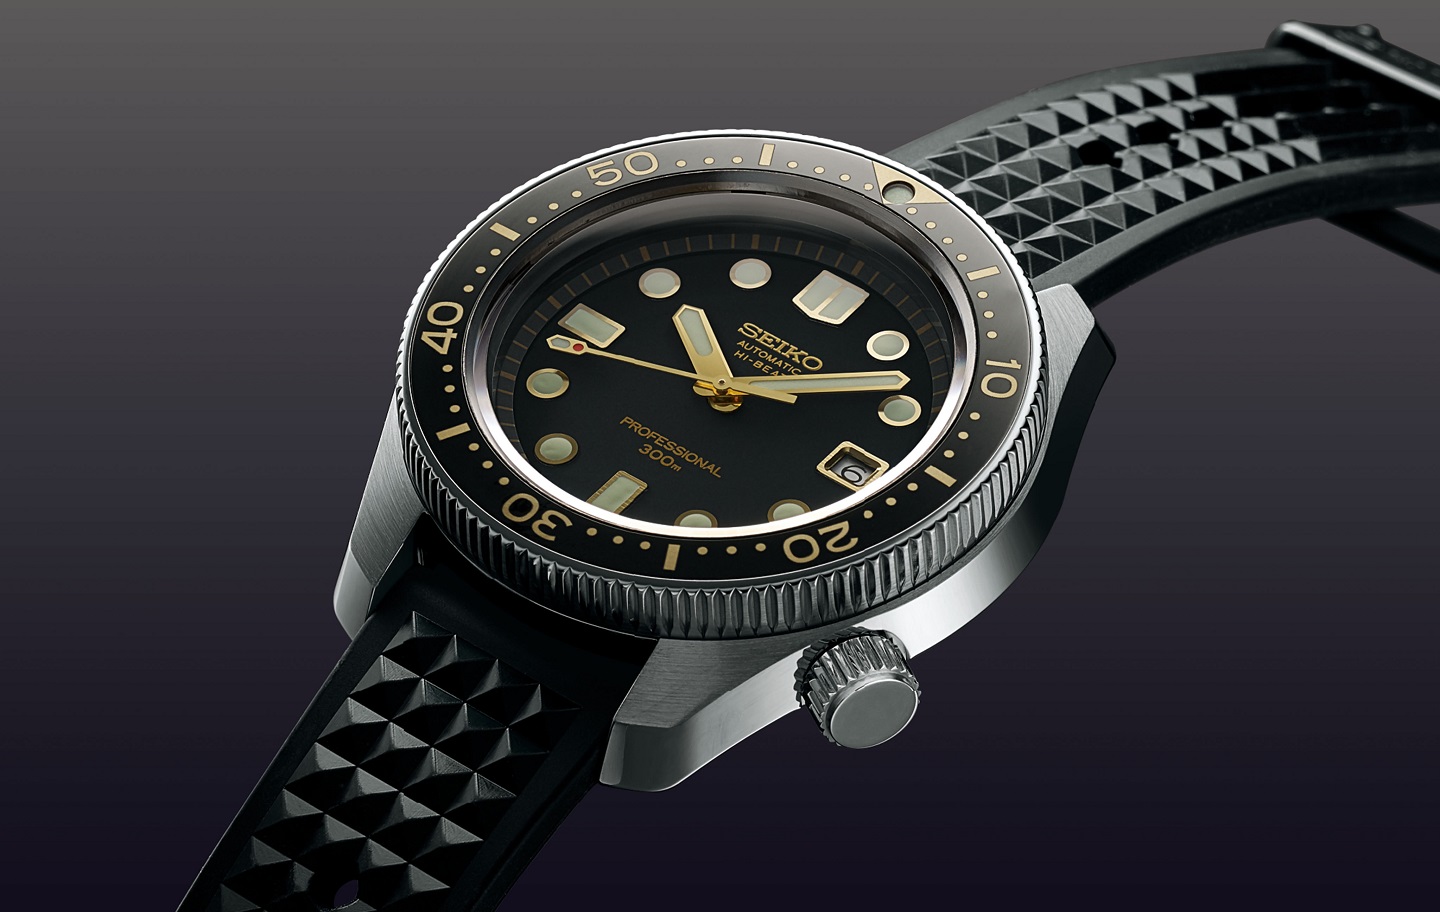 Seiko's newest Baselworld watches